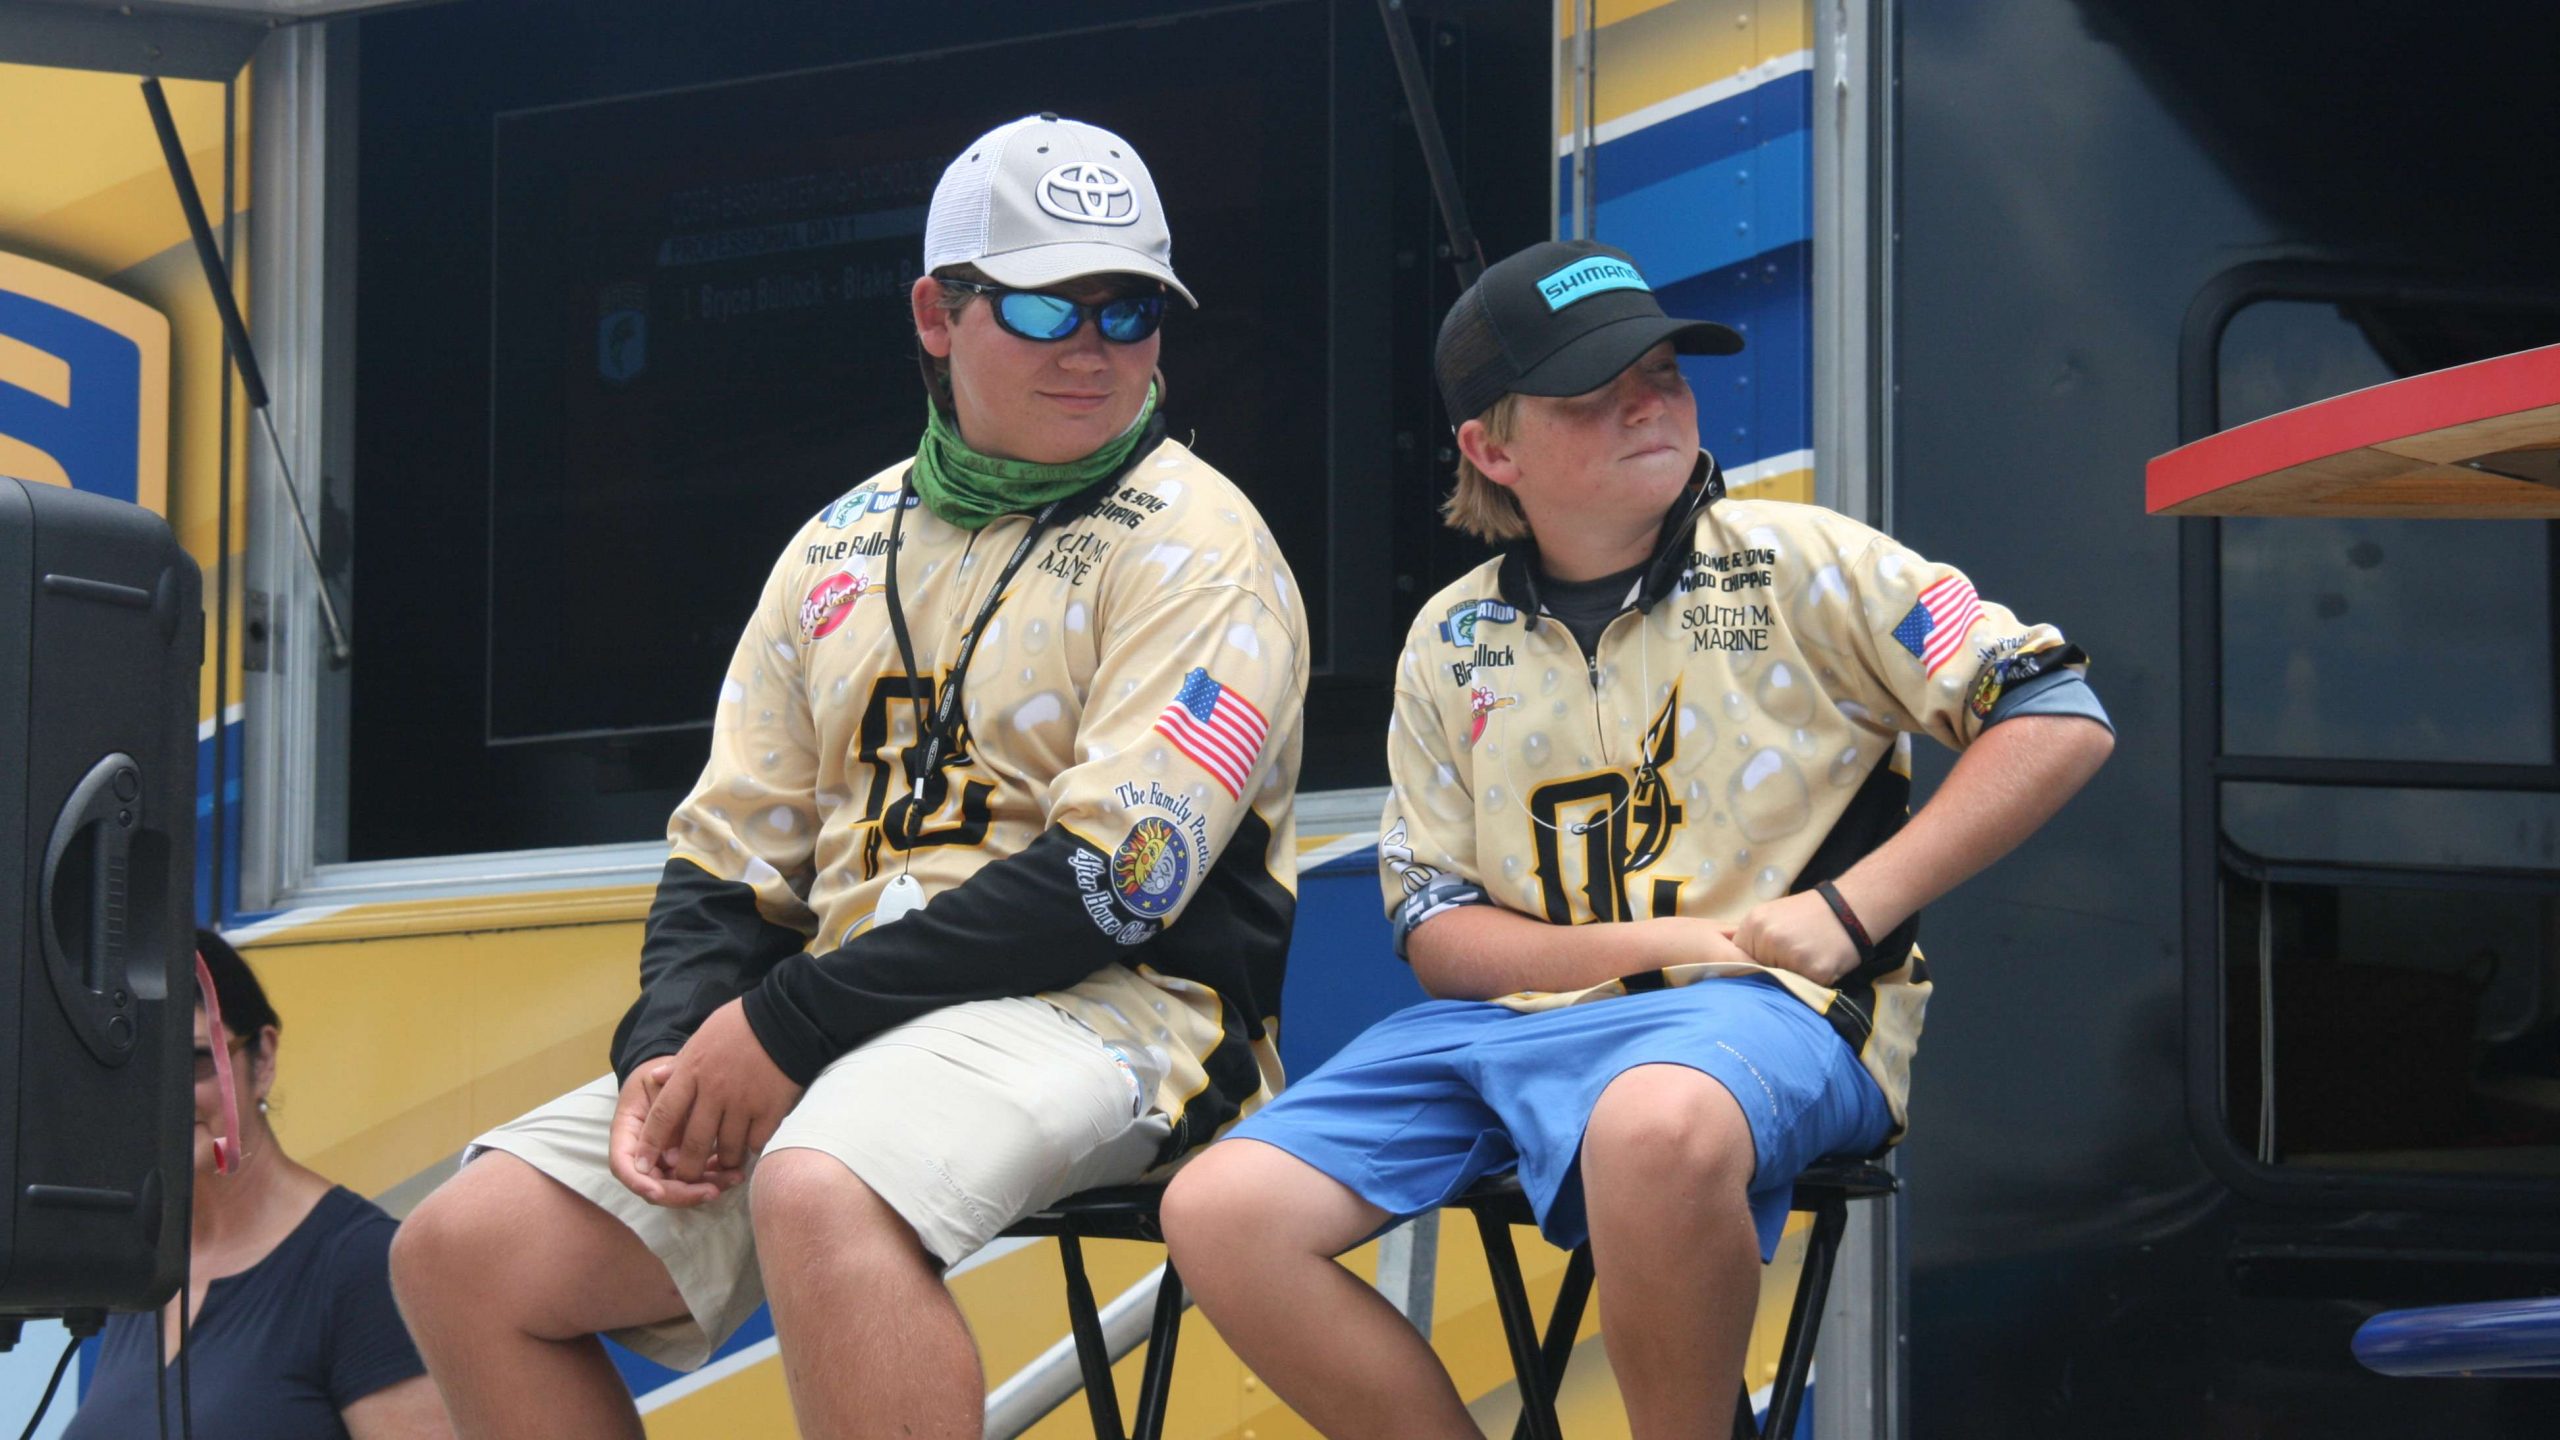 Bryce and Blake Bullock of Oak Grove (Miss.) weighed in first and took the hot seat, despite having only one fish to weigh. Their stay on stage was short-lived, however.